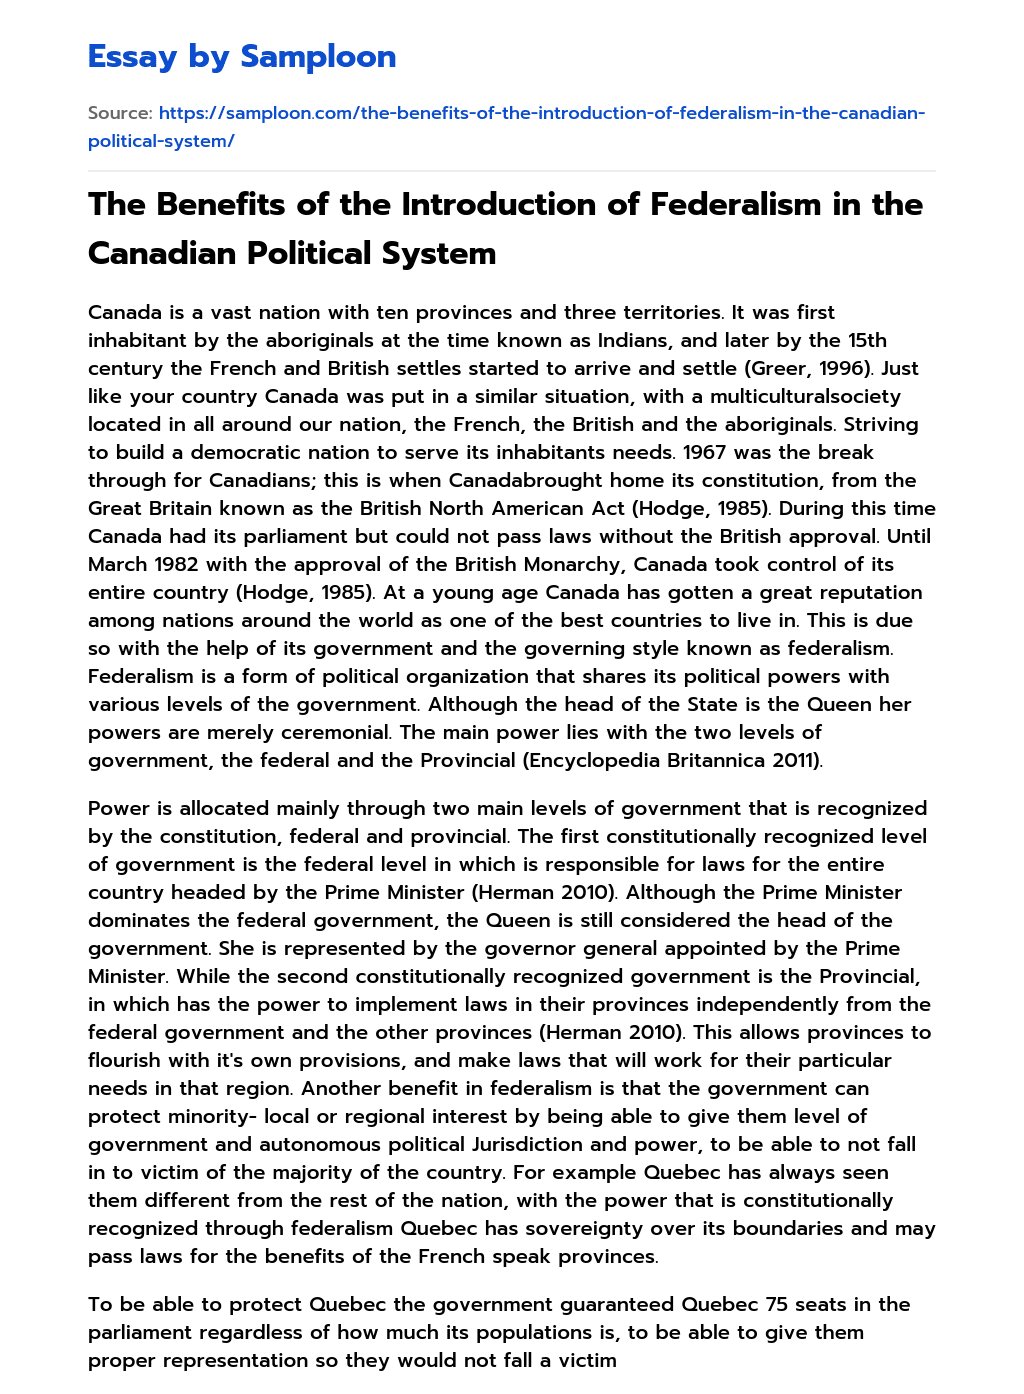 The Benefits of the Introduction of Federalism in the Canadian Political System essay